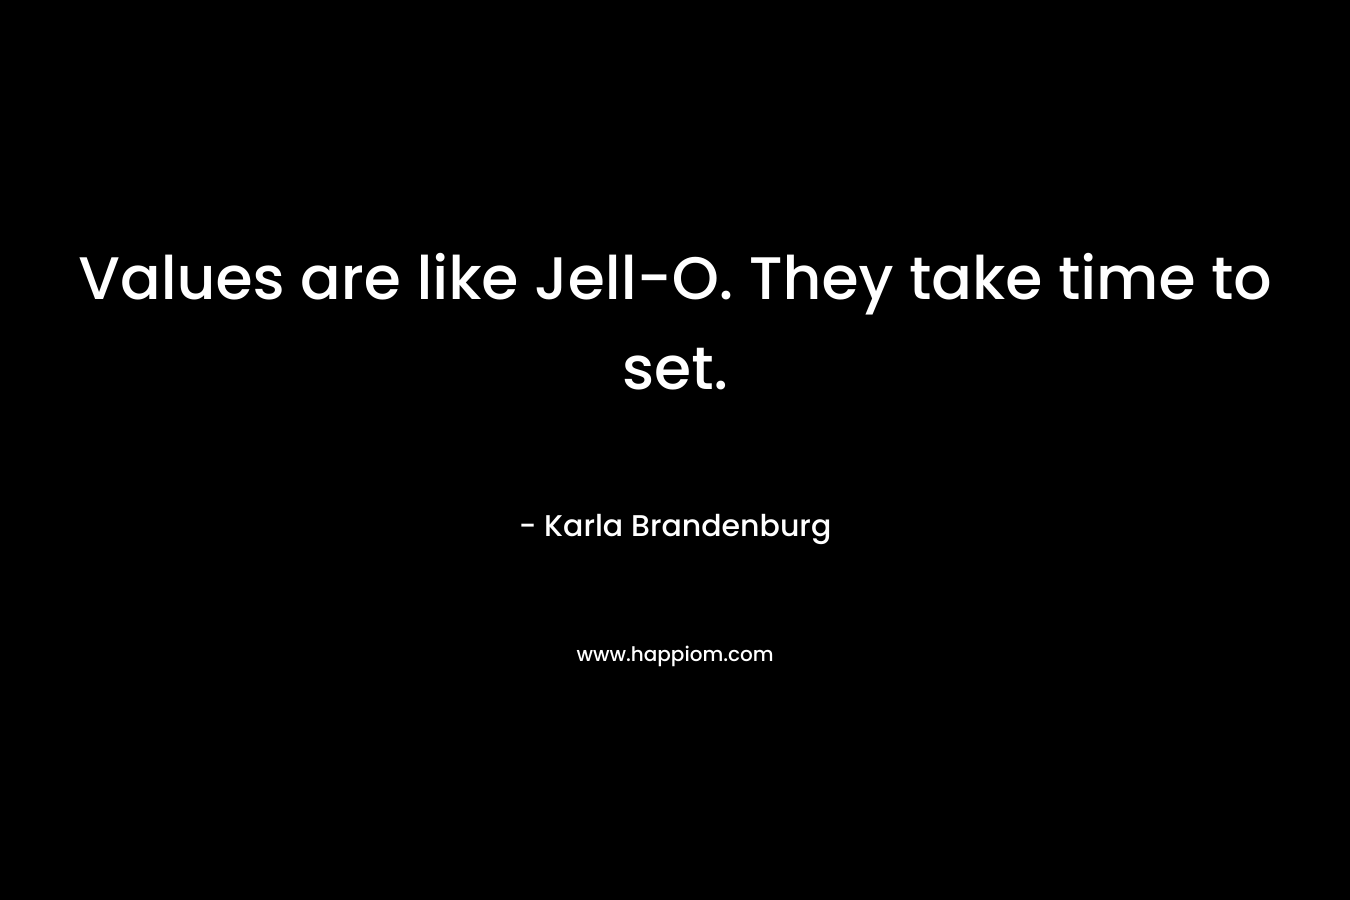 Values are like Jell-O. They take time to set. – Karla Brandenburg